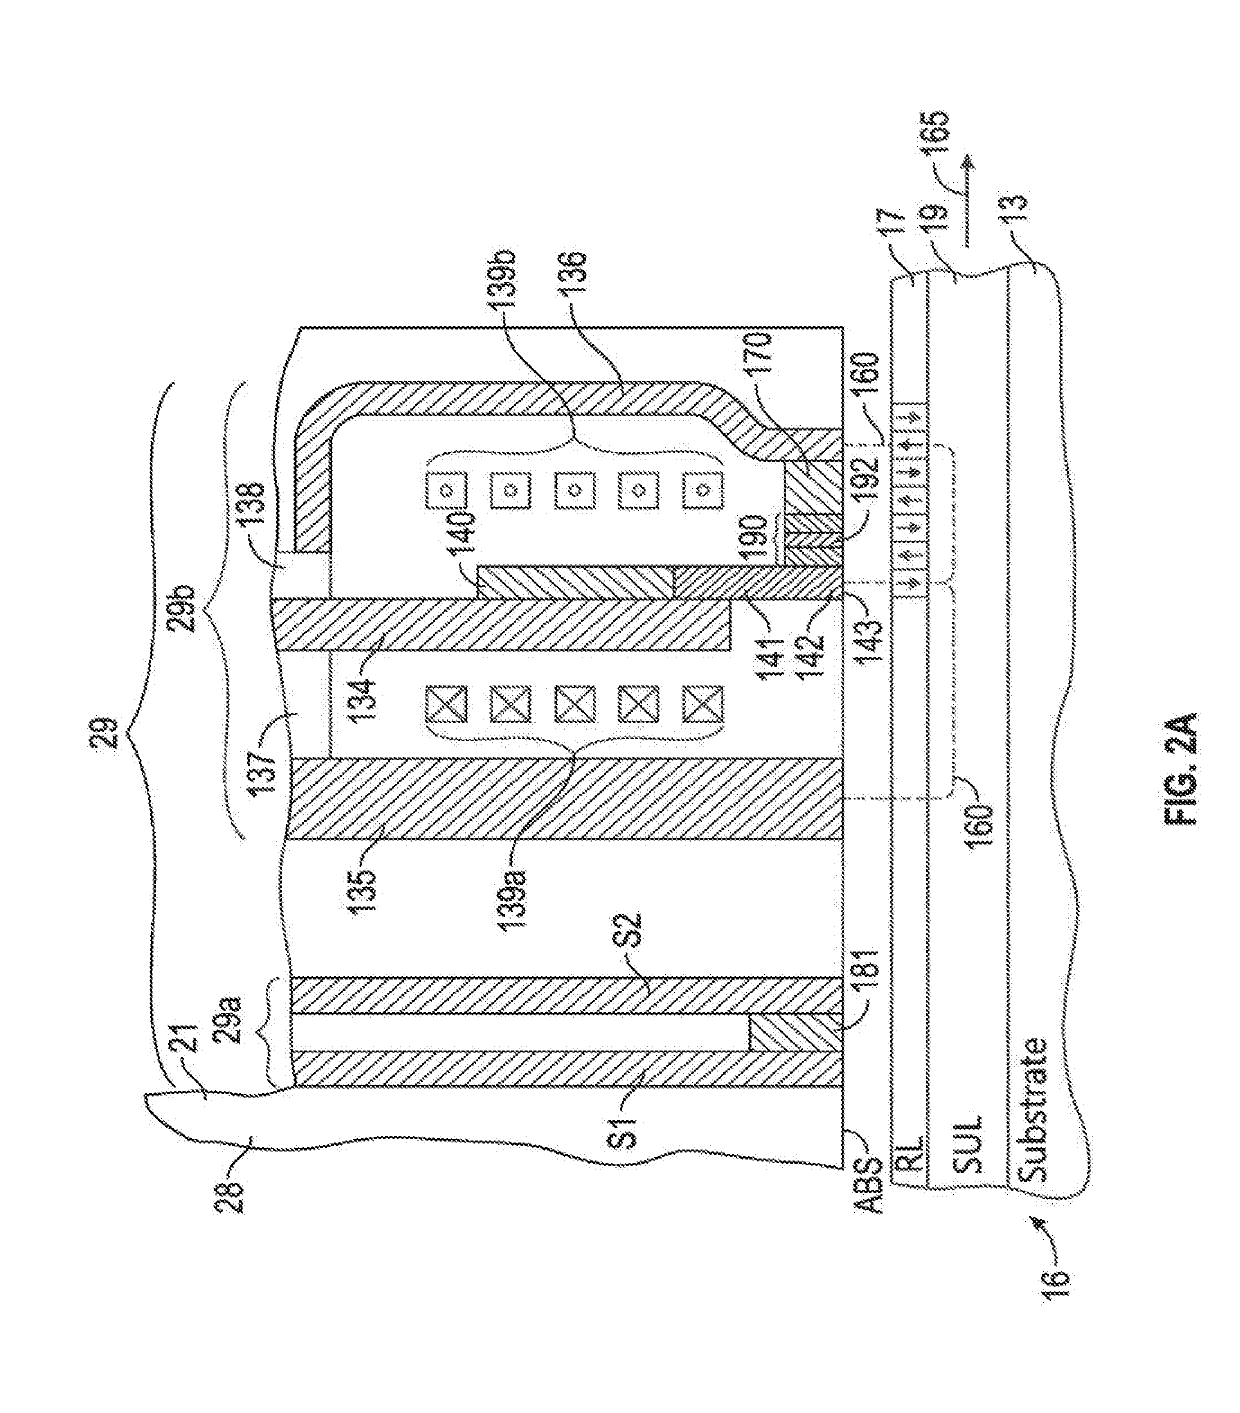 Spin transfer torque (STT) device with template layer for heusler alloy magnetic layers